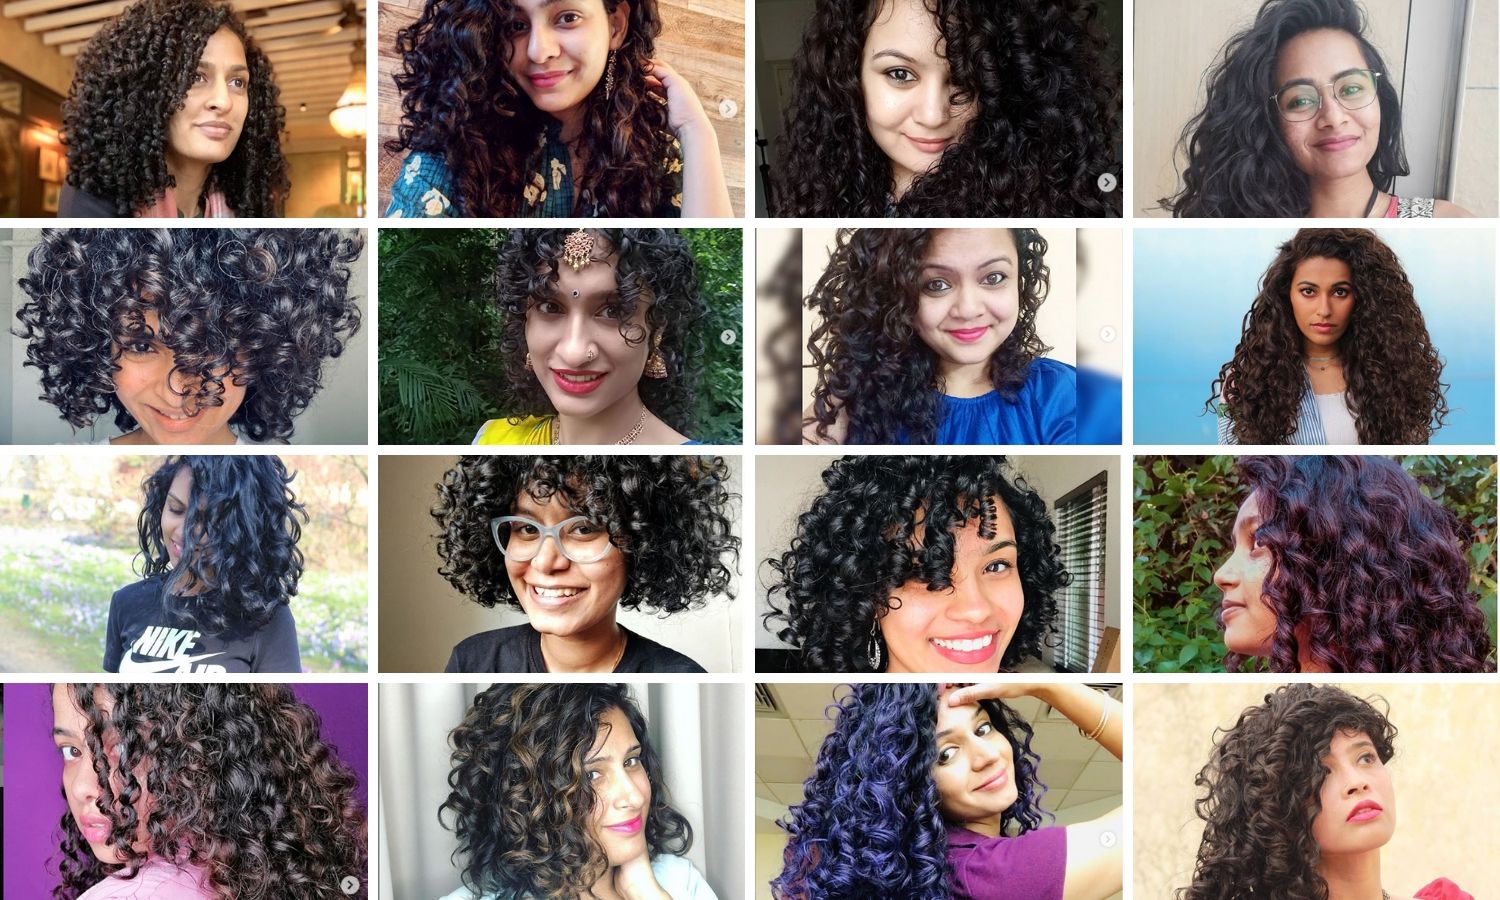 Brown curly hair bloggers